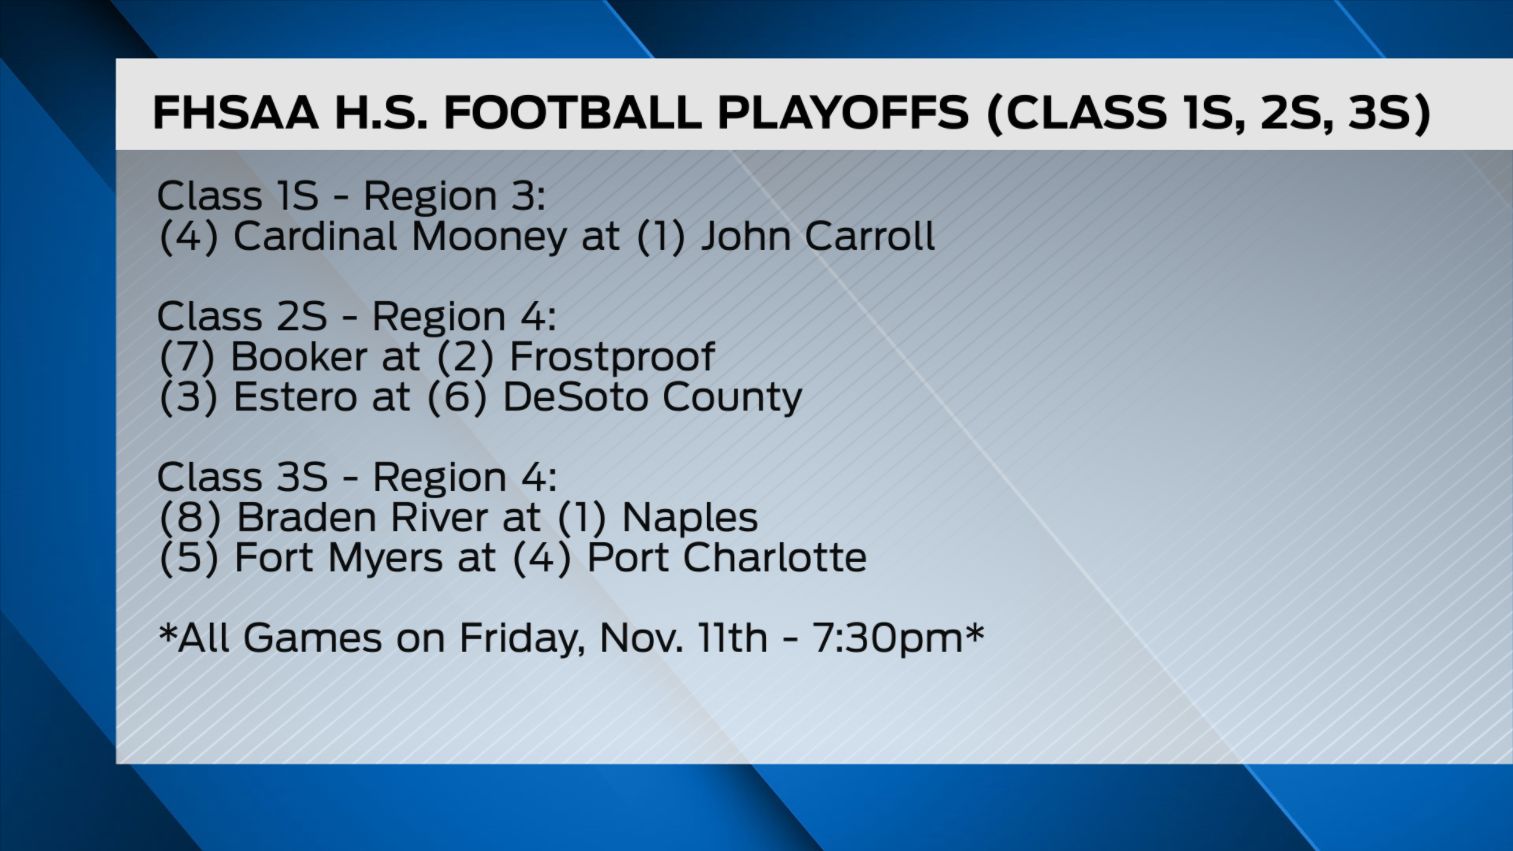 FHSAA releases football playoff brackets Suncoast News and Weather